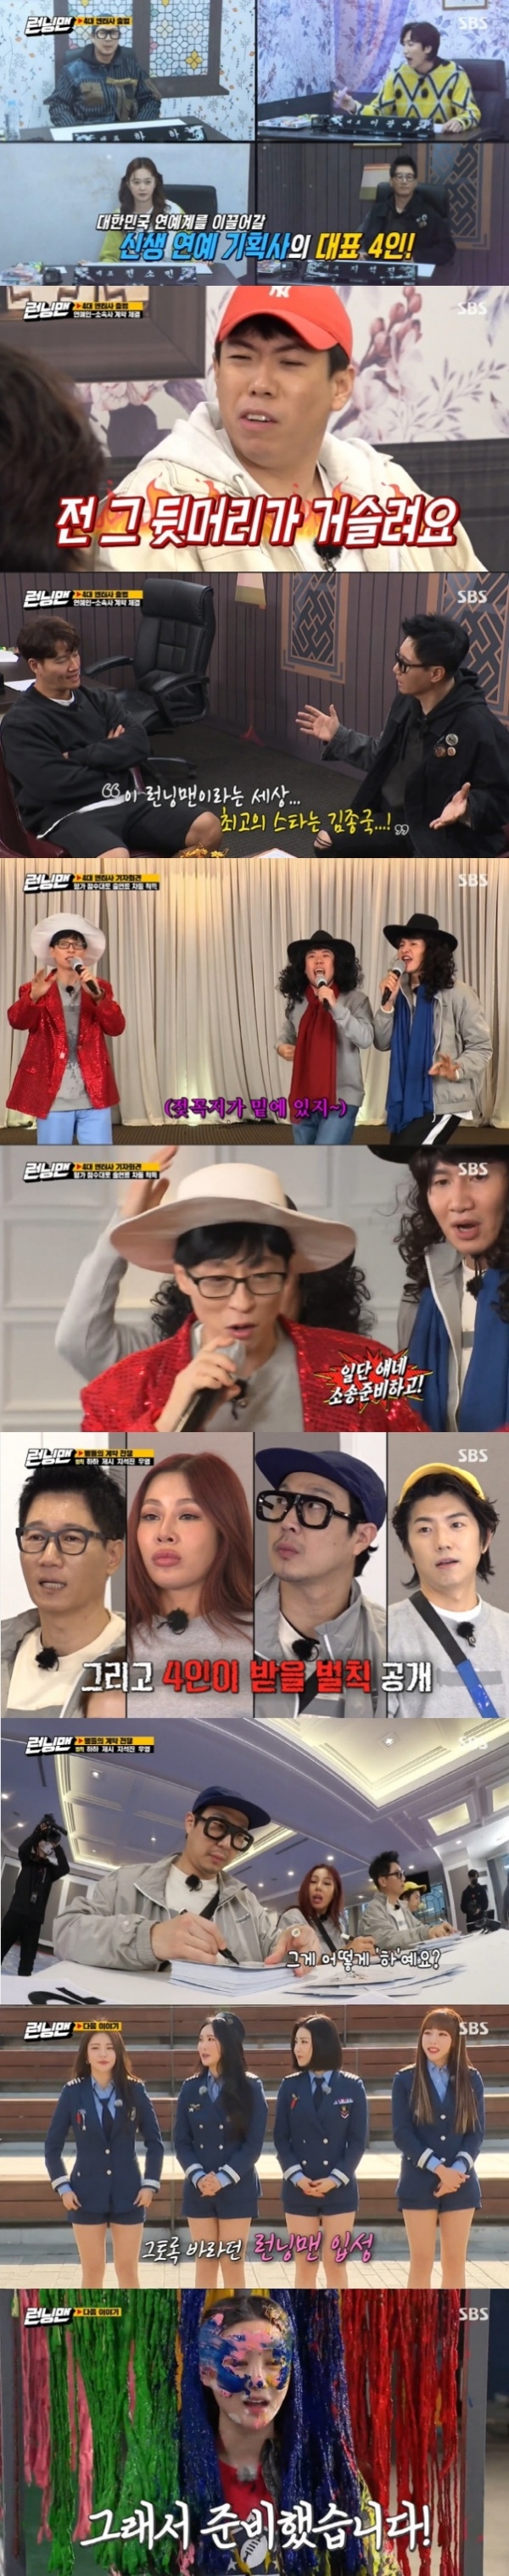 The rise in TV viewer ratings of Running Man is steep.According to Nielsen Korea, a TV viewer rating research agency, on the 29th, SBS entertainment program Running Man, which was broadcast the previous day, recorded 3.7% of the 2049 target TV viewer ratings (based on households in the metropolitan area), which rose for three consecutive weeks and kept the top spot in the same time zone.Top TV viewer ratings per minute jumped to 8 per cent.On this day, Race was decorated with The Contract War of the Stars Race, and Jessie X Jung Wooyoung was a guest, while Haha, Lee Kwang-soo, Ji Suk-jin and Jeon So-min turned into entertainment representatives.Representatives had to succeed in signing a contract to cooperate with entertainers and distribution of profits, and a sparkling contract war was held from the beginning.In particular, Lee Kwang-soo surprised everyone by actually cutting his back hair at the end of Yang Se-chan, saying, I will sign if I cut the back hair.At the subsequent renewal time, Ji Suk-jins agency was closed down with no contractor, and Ji Suk-jin signed a contract with J Enter (Jeon So-min).The members missed the correct answer by revealing the knowledge base in the next mission, Yaja Golden Bell, and Jessie and Jung Wooyoung were also surprised by the problems of the Russian Presidents full name and the Argentine capital.As a result of the final mission, Running Entertainment Hall, Jeon So-min was ranked first among the three representatives and Song Ji-hyo was ranked first in entertainers.The scene was the best one minute for the best TV viewer ratings per minute, and Jung Wooyoung, Jessie and Ji Suk-jin were punished.Four people, including the representative Haha, signed 100 autographs with penalties.